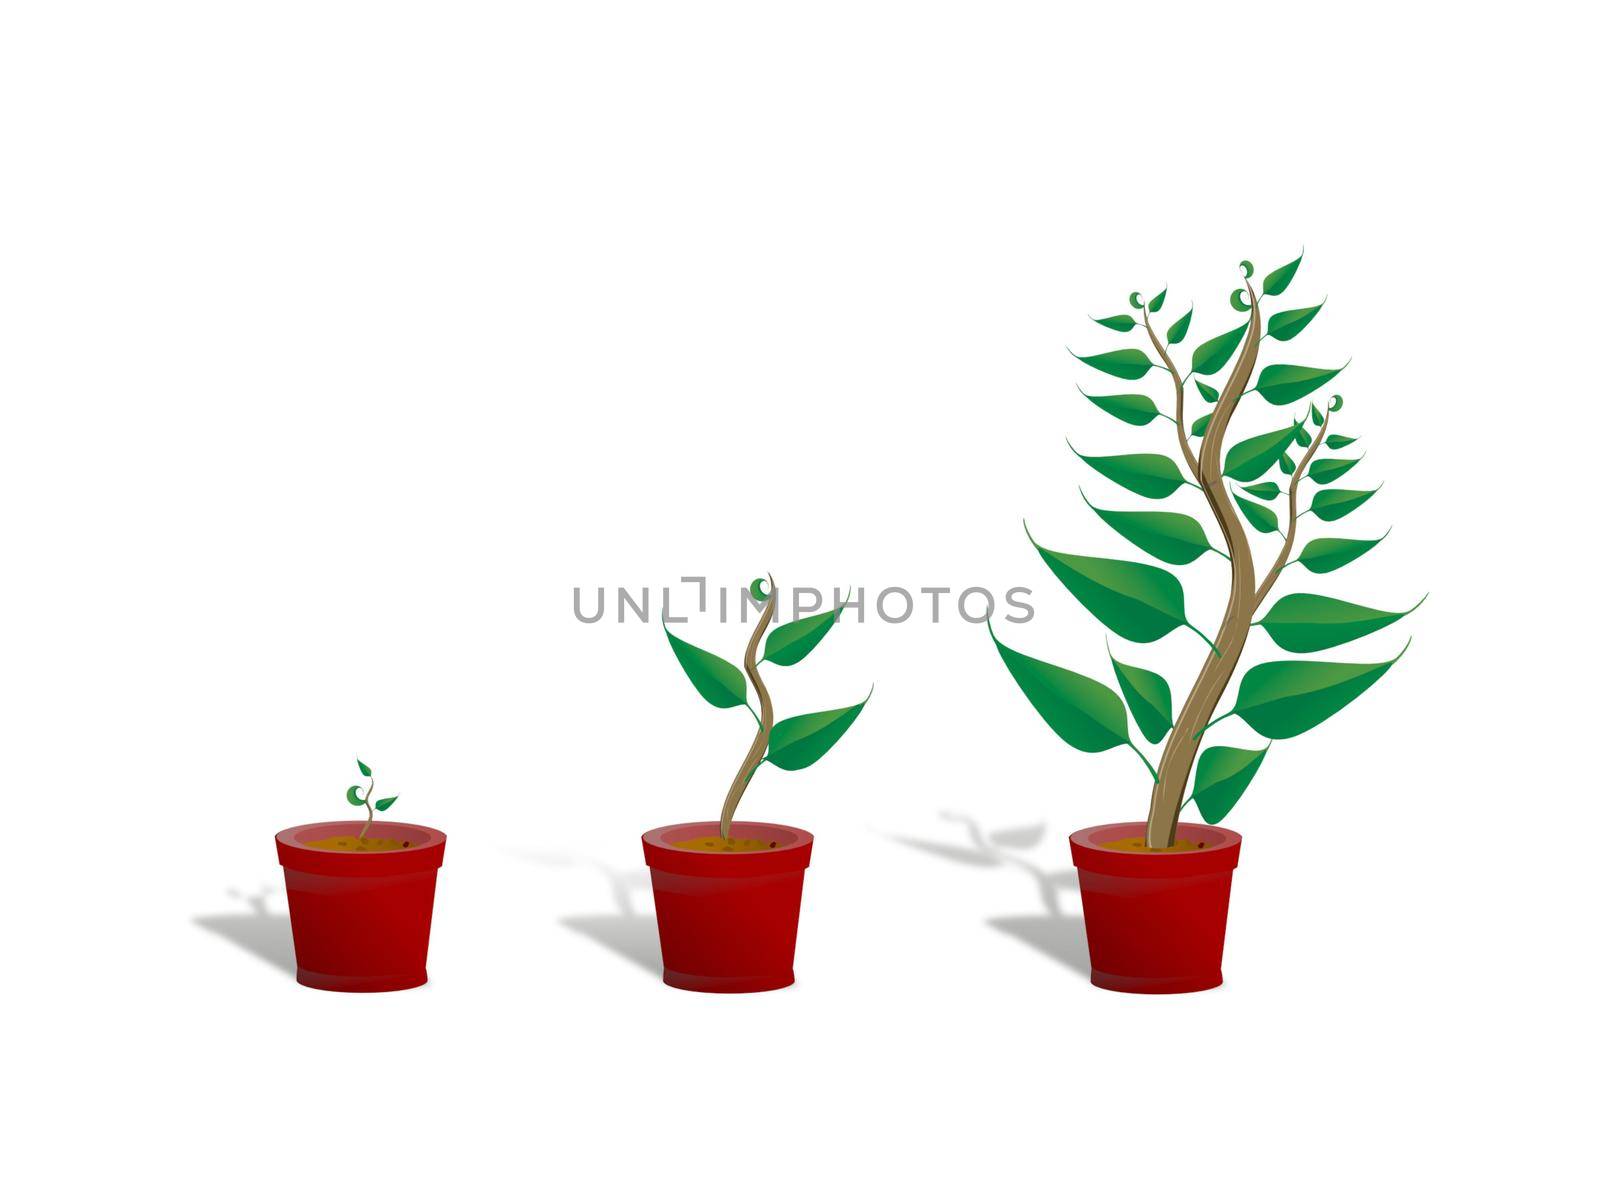 three plants in different sizes on white background - 3d rendering by mariephotos